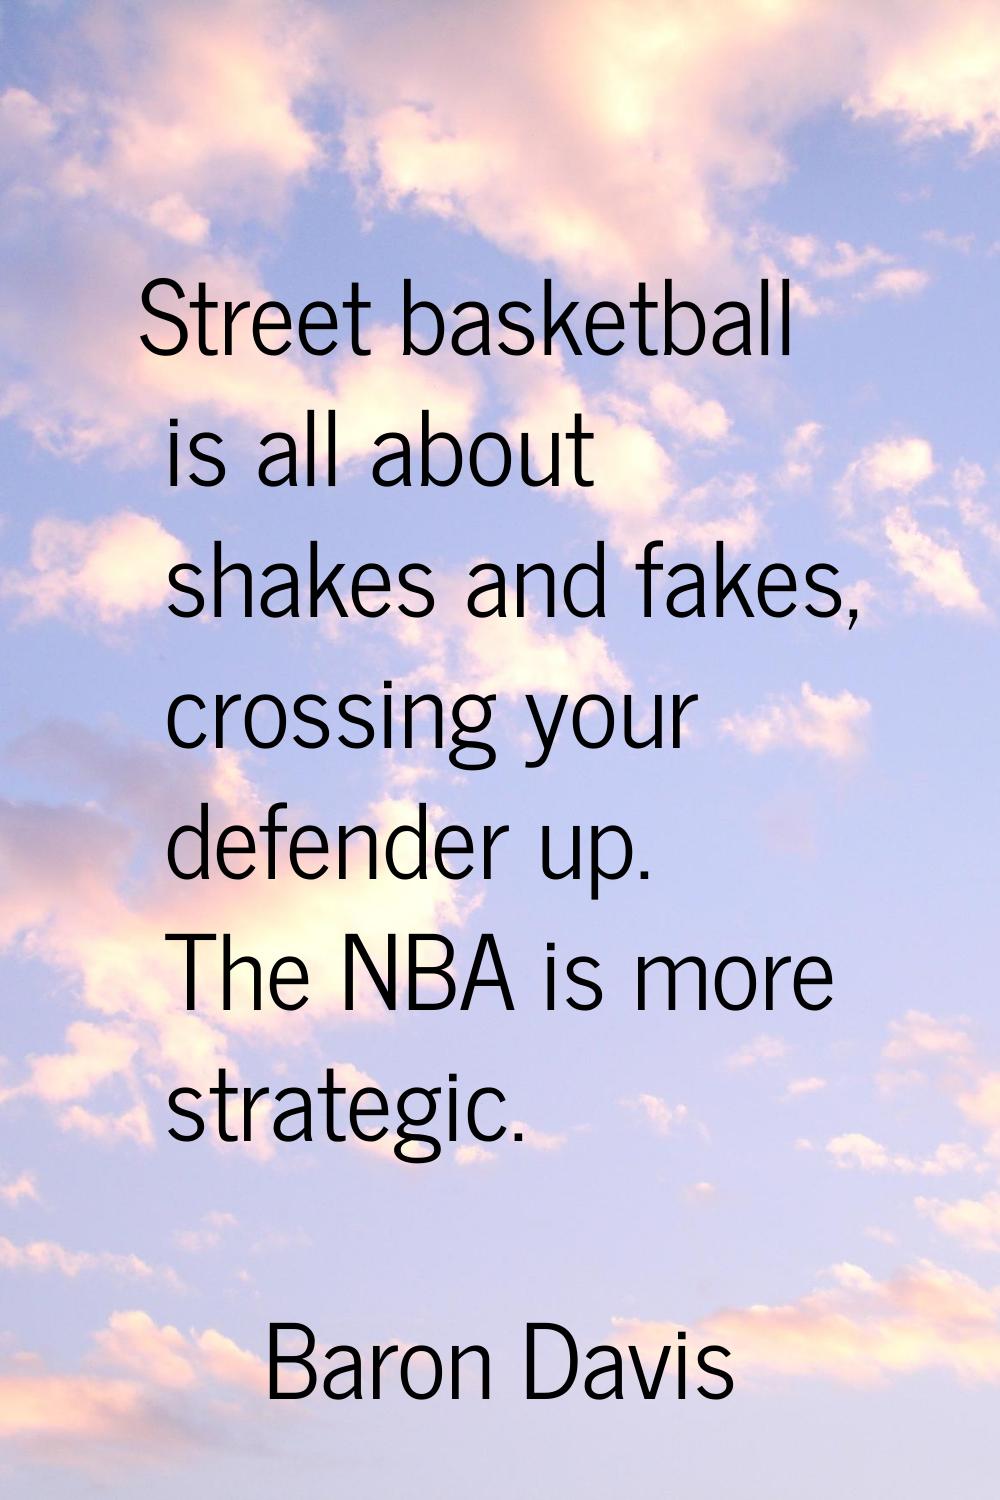 Street basketball is all about shakes and fakes, crossing your defender up. The NBA is more strateg